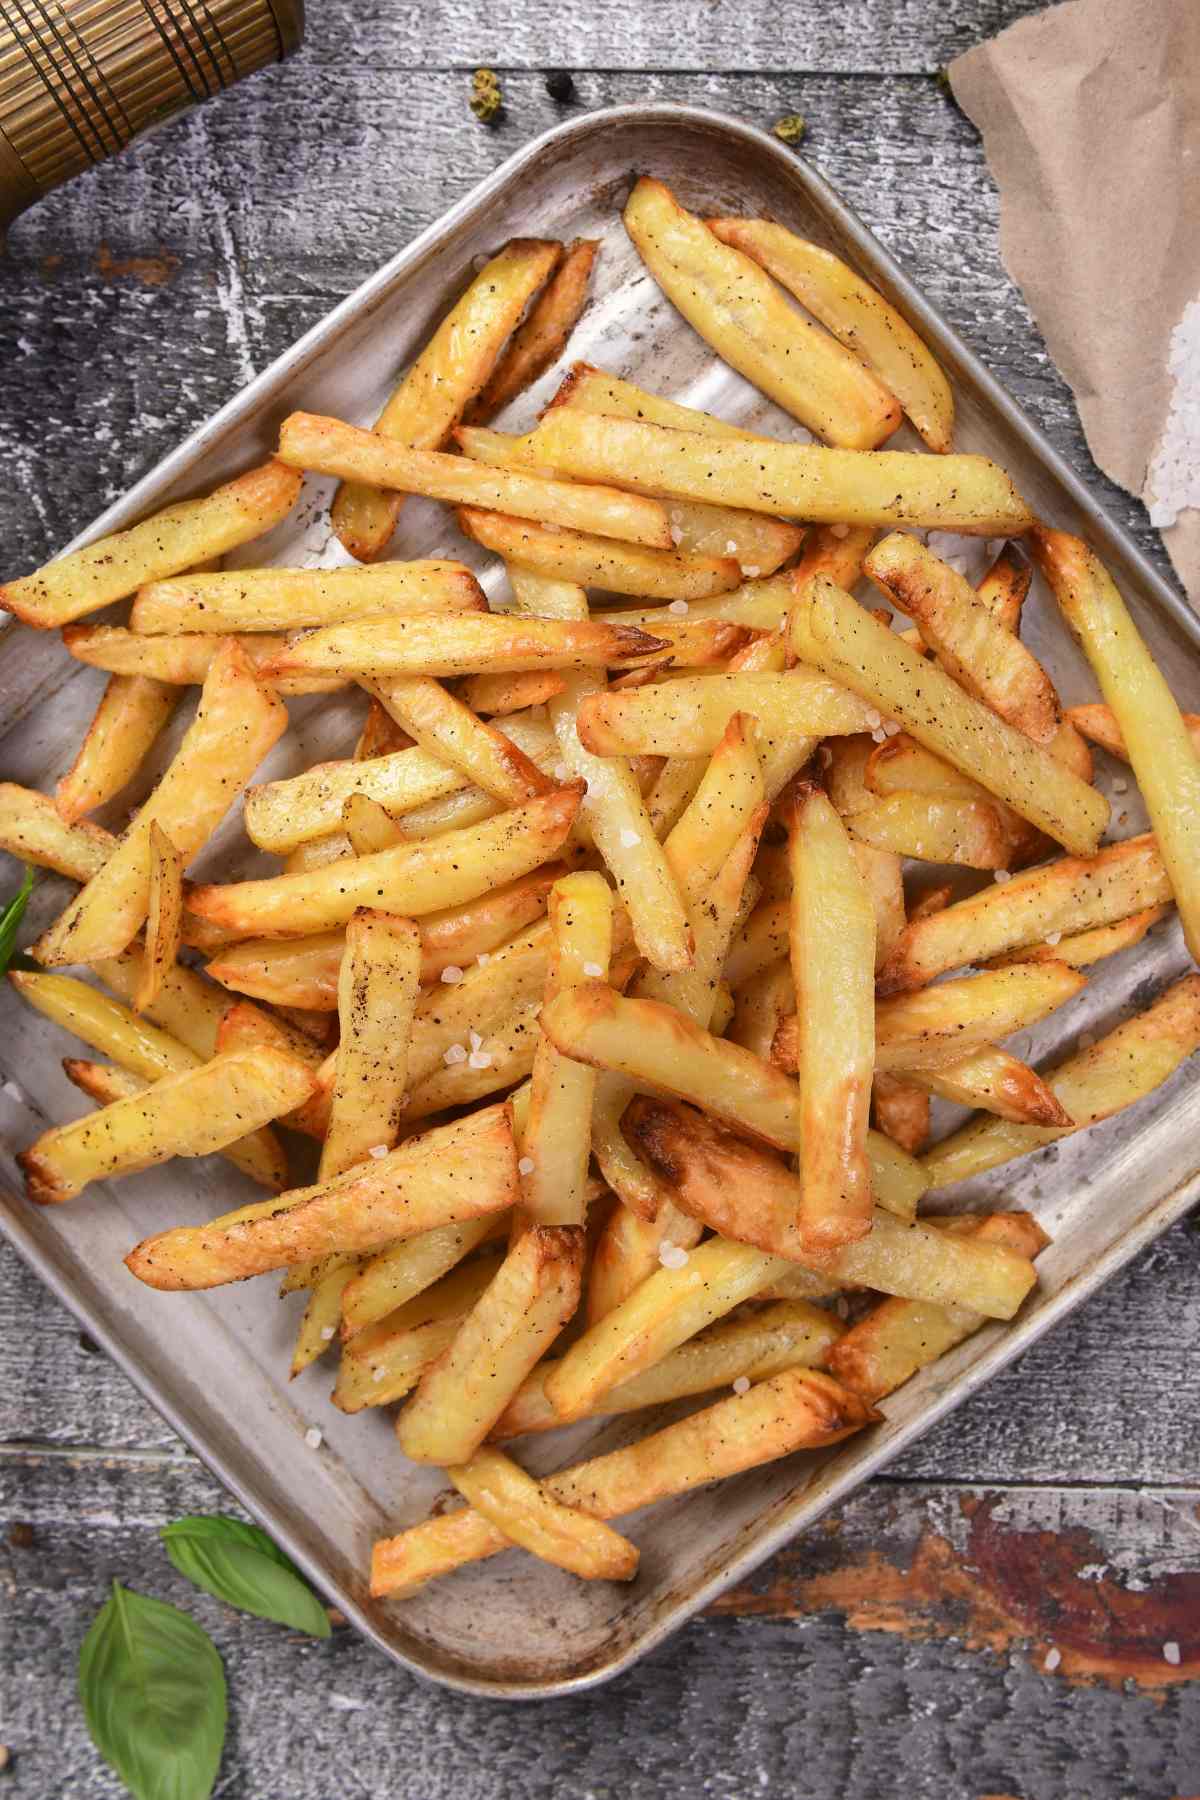 Ever wonder whether you can enjoy French fries while you’re following a keto diet? How many carbs are in French fries? The keto diet is a low-carb, high-fat diet that is known to help with weight loss and improve blood sugar levels. In this post, you’ll learn whether you can eat French fries on a keto diet and how to make keto-friendly French fries.